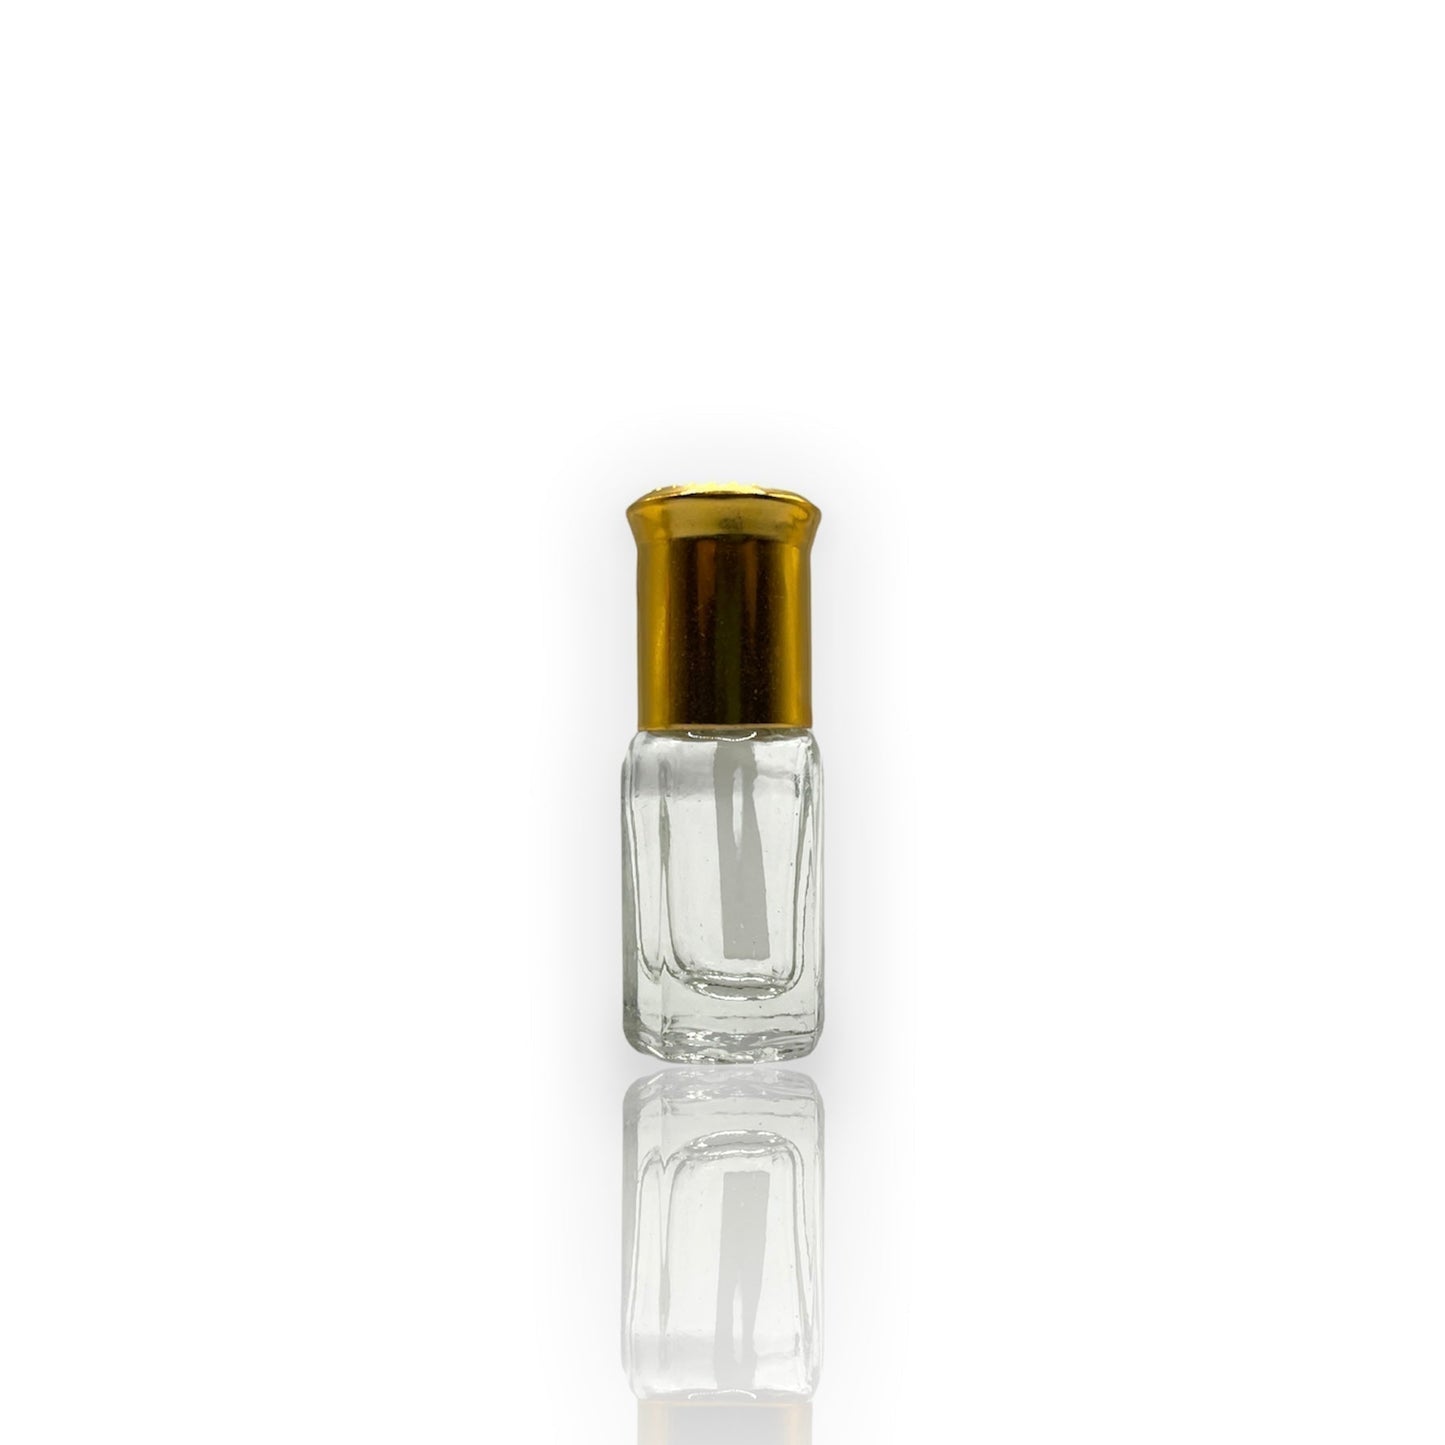 F-11 Oil Perfume *Inspired by Prada_Candy